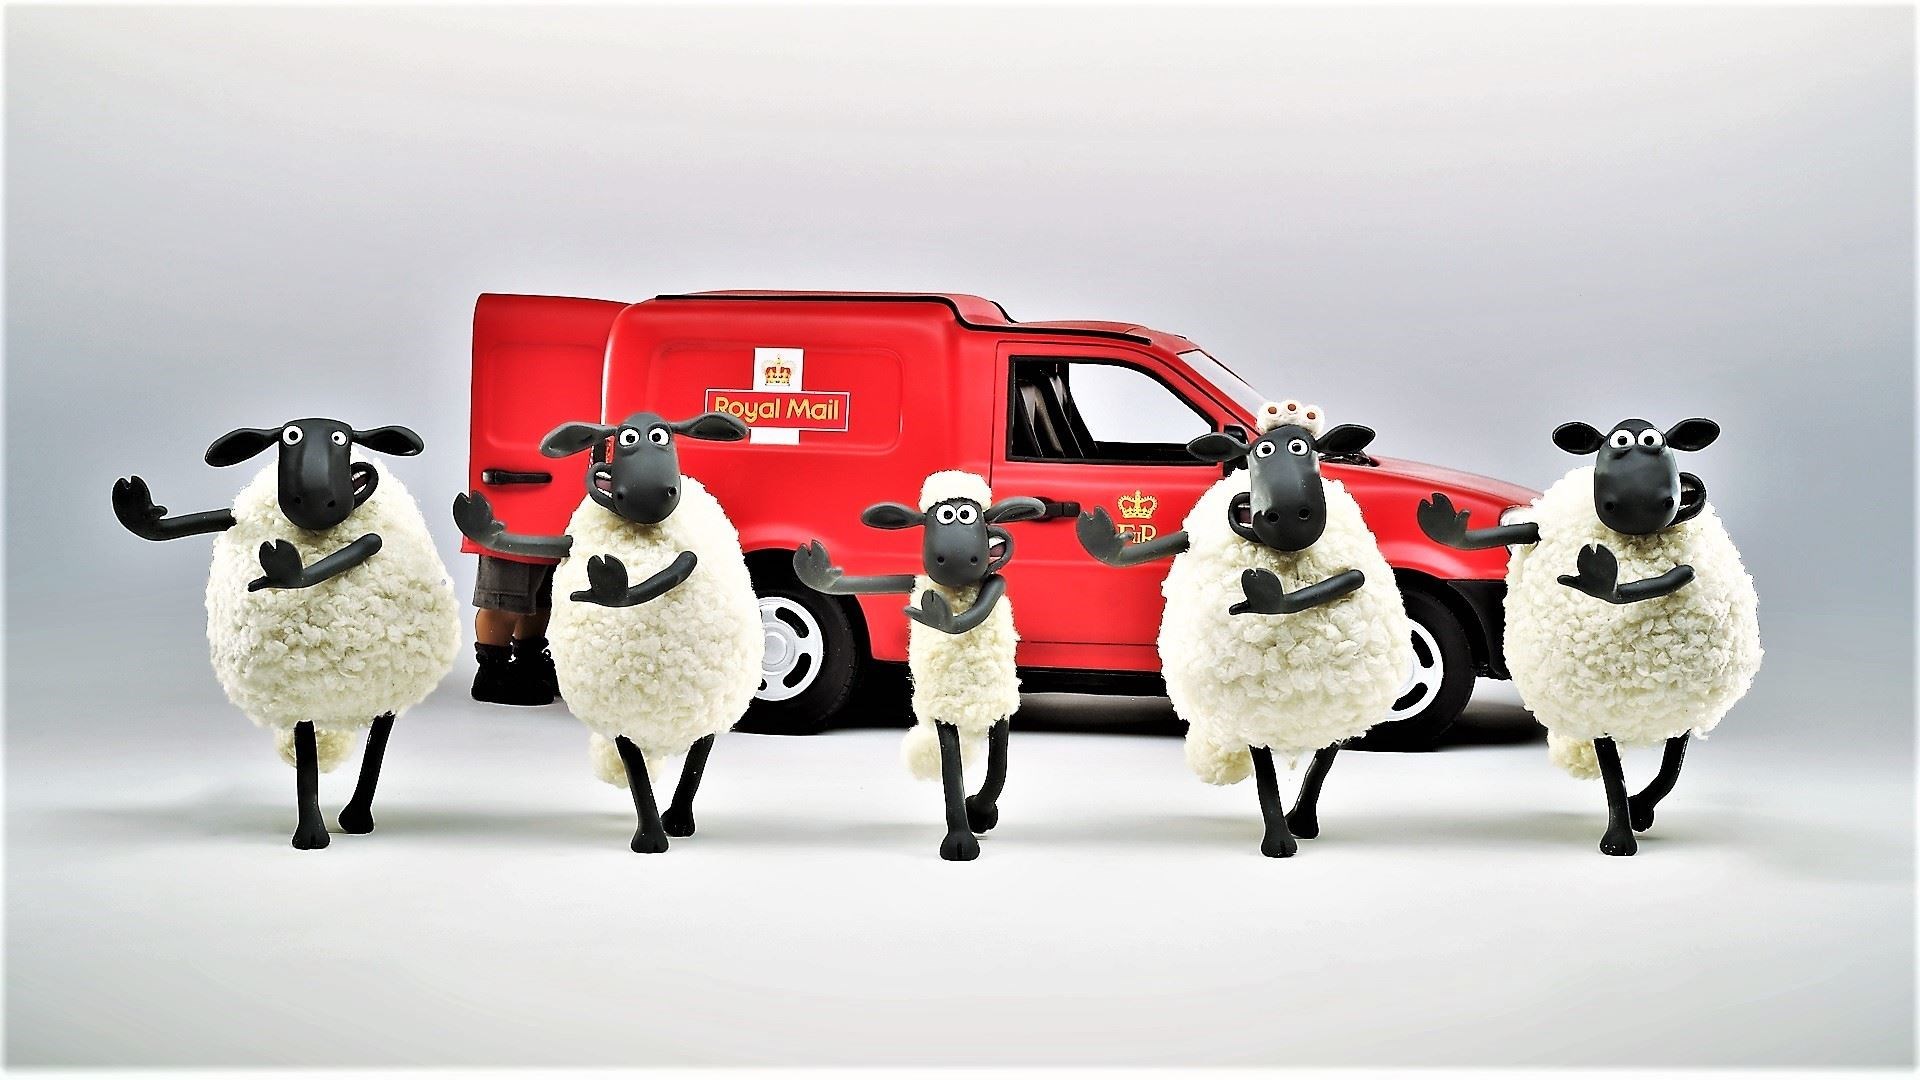 Shaun the sheep video can be seen via the Royal Mail app.